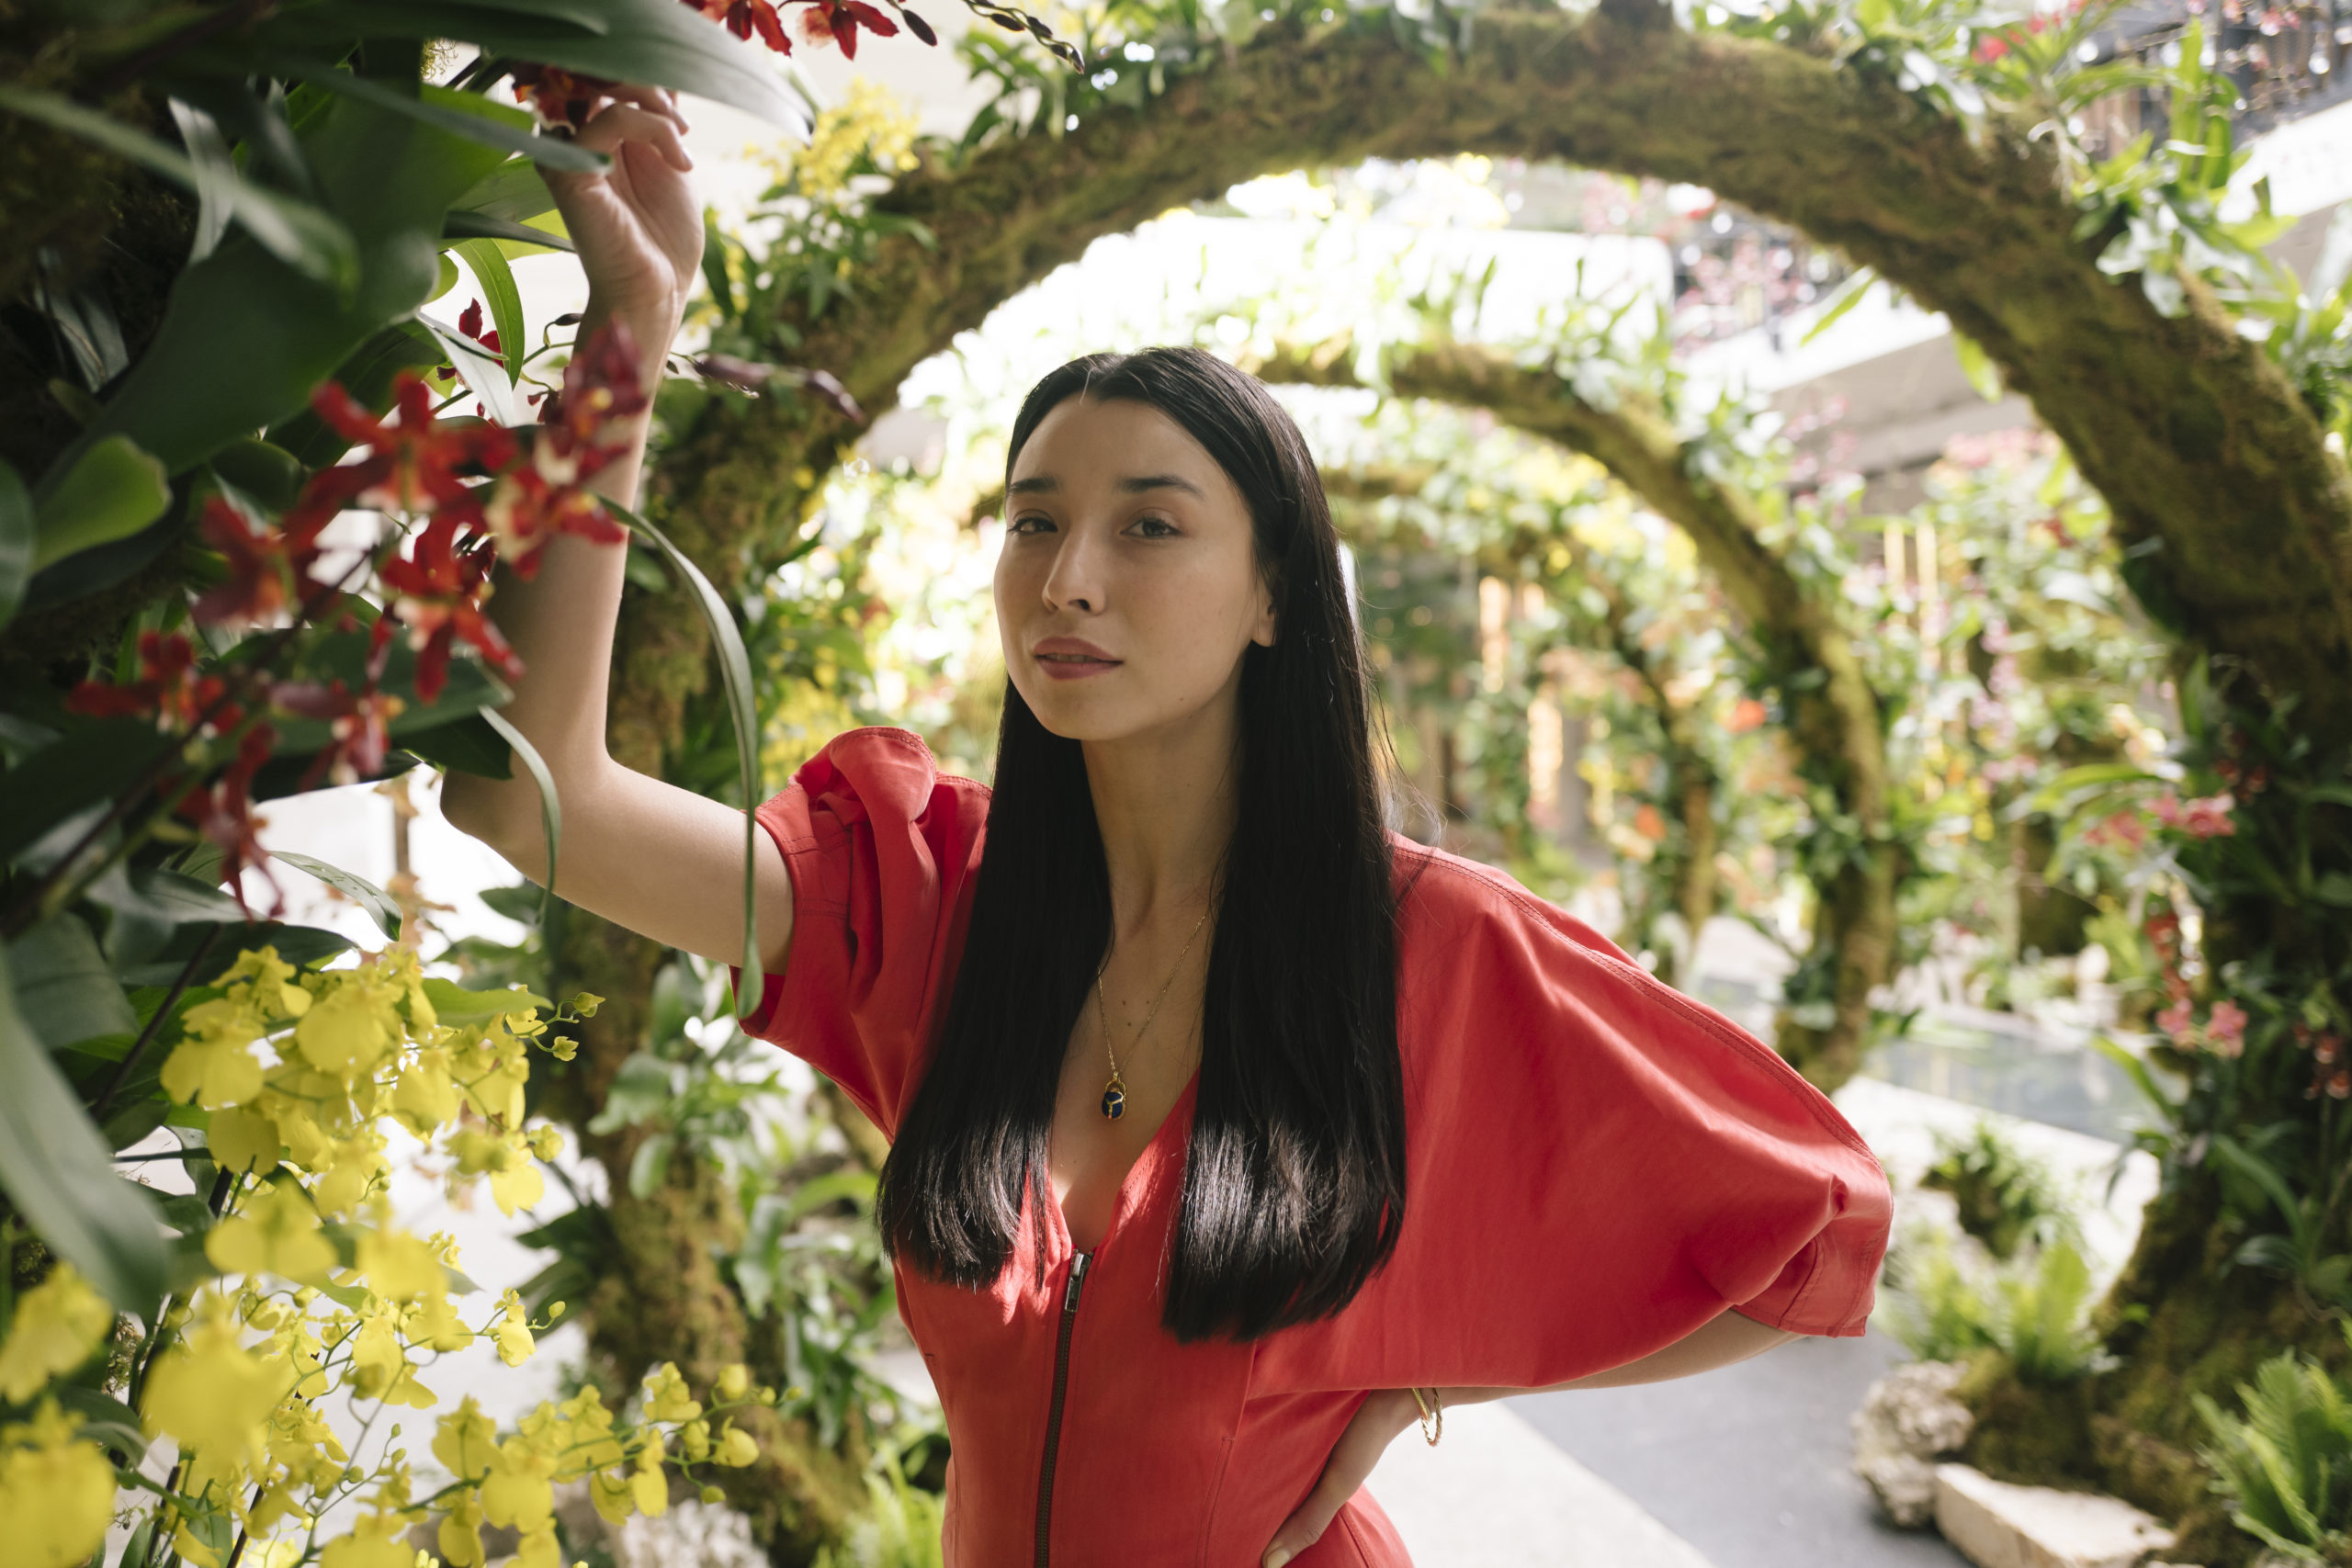 Landscape artist Lily Kwong at her Moon Gates installation in Miami in 2019